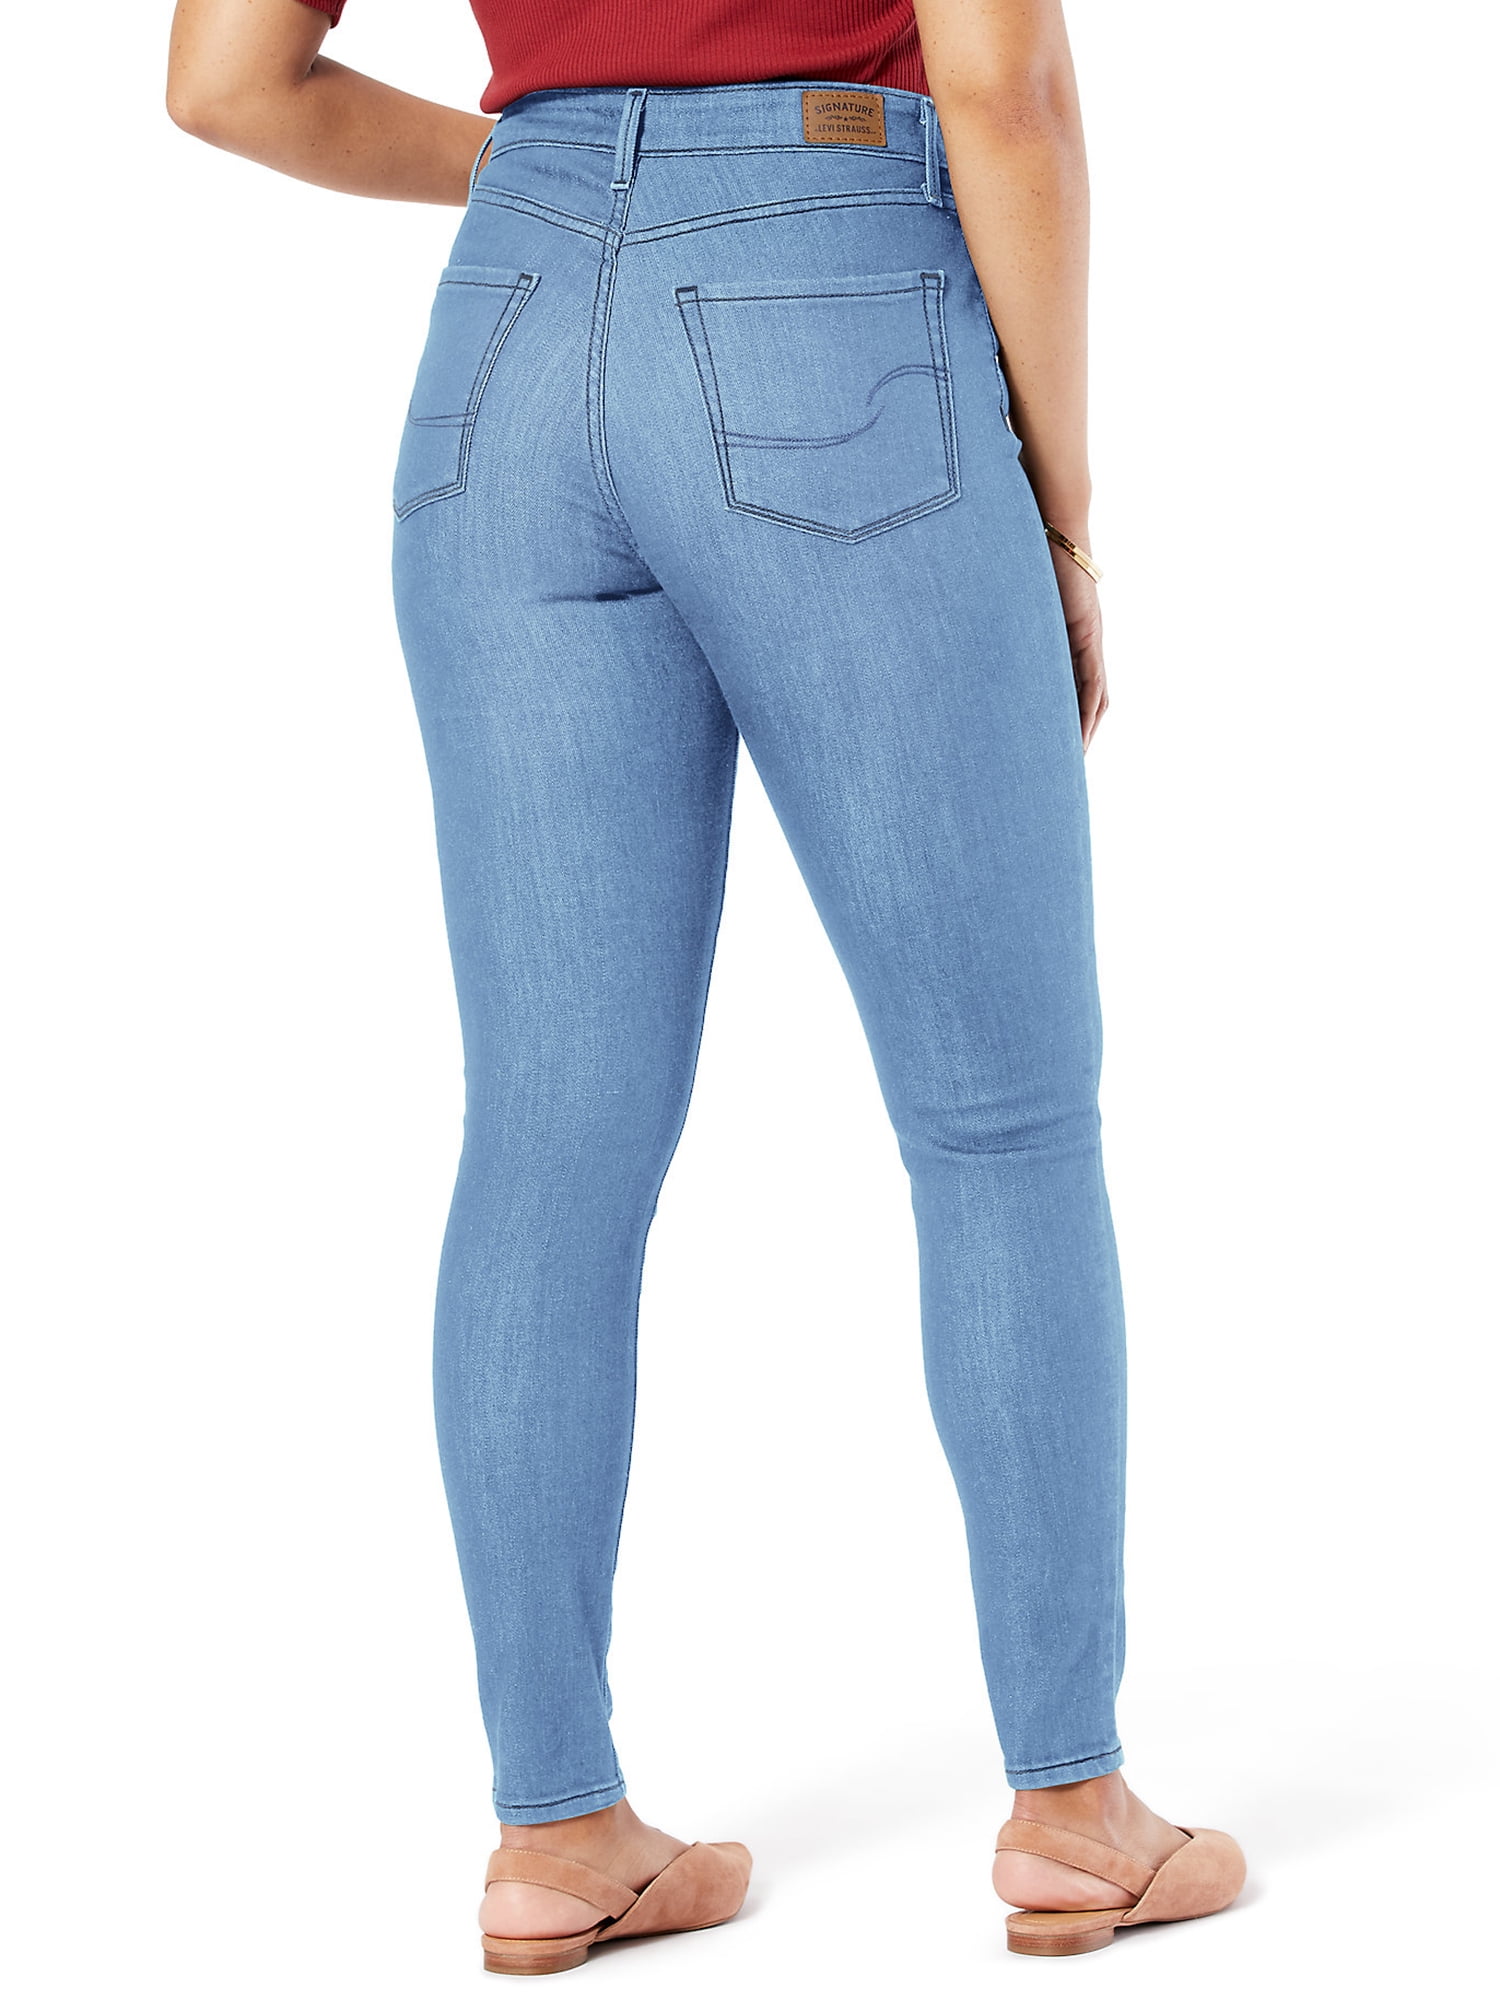 Signature by Levi Strauss & Co. Women's High Rise Skinny Jeans - Walmart.com